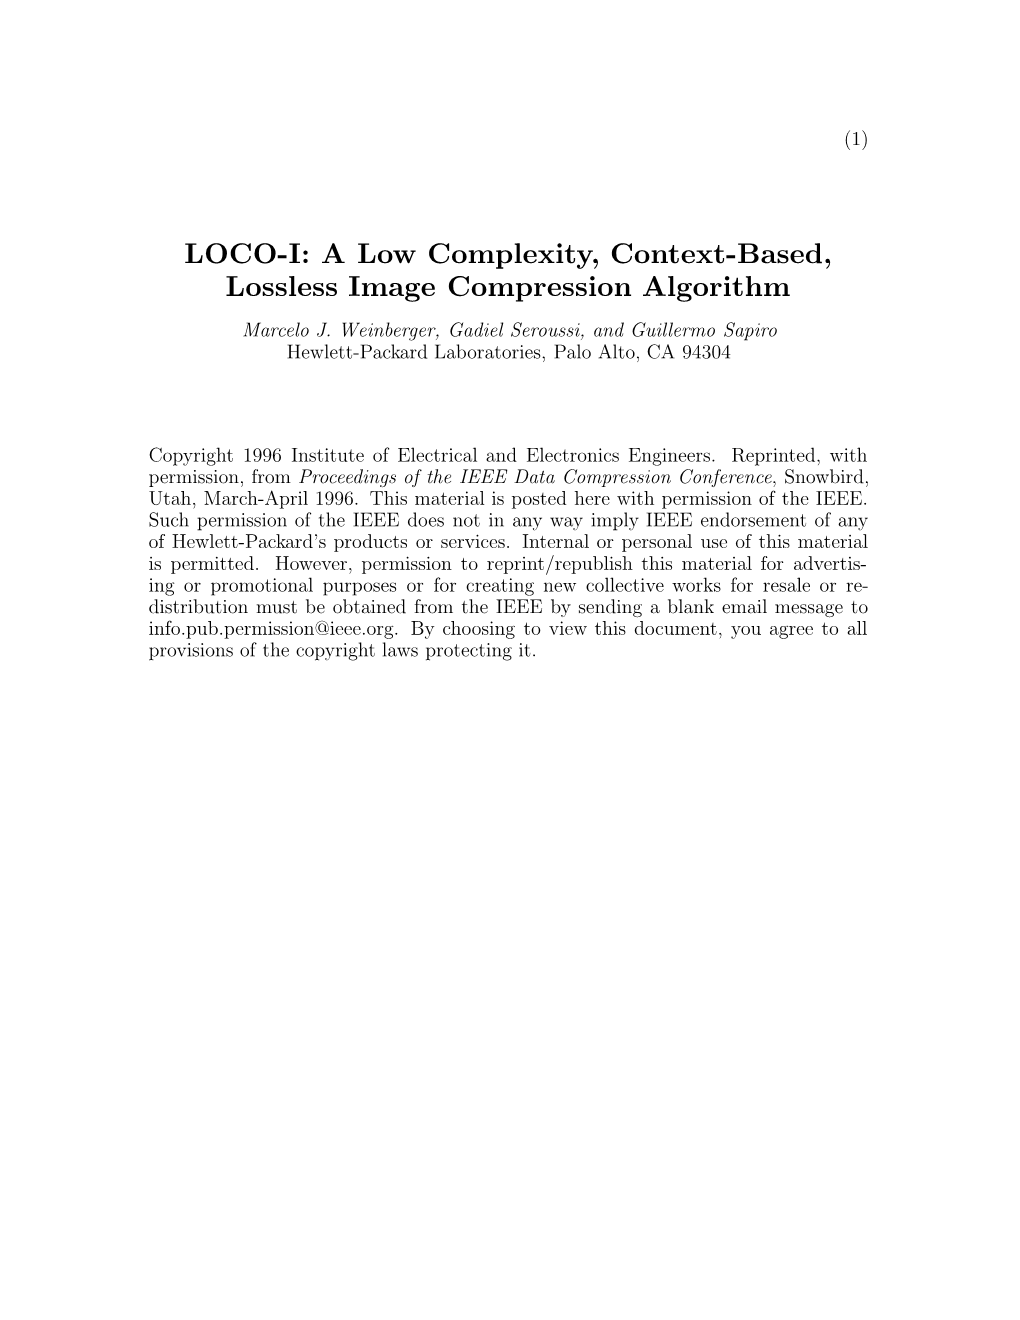 LOCO-I: a Low Complexity, Context-Based, Lossless Image Compression Algorithm Marcelo J